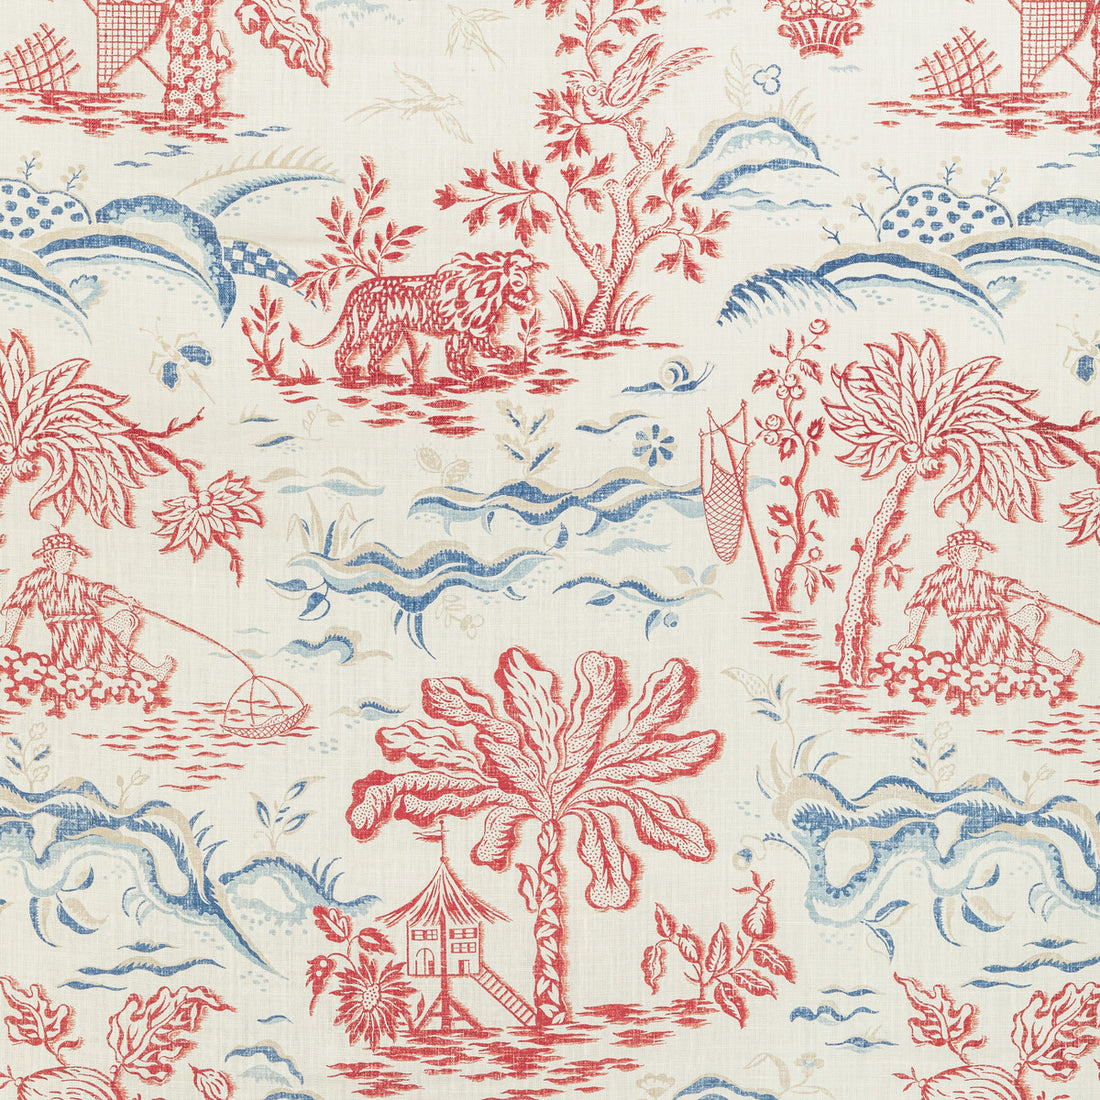 Valensole Print fabric in red/blue color - pattern 8022101.195.0 - by Brunschwig &amp; Fils in the Manoir collection